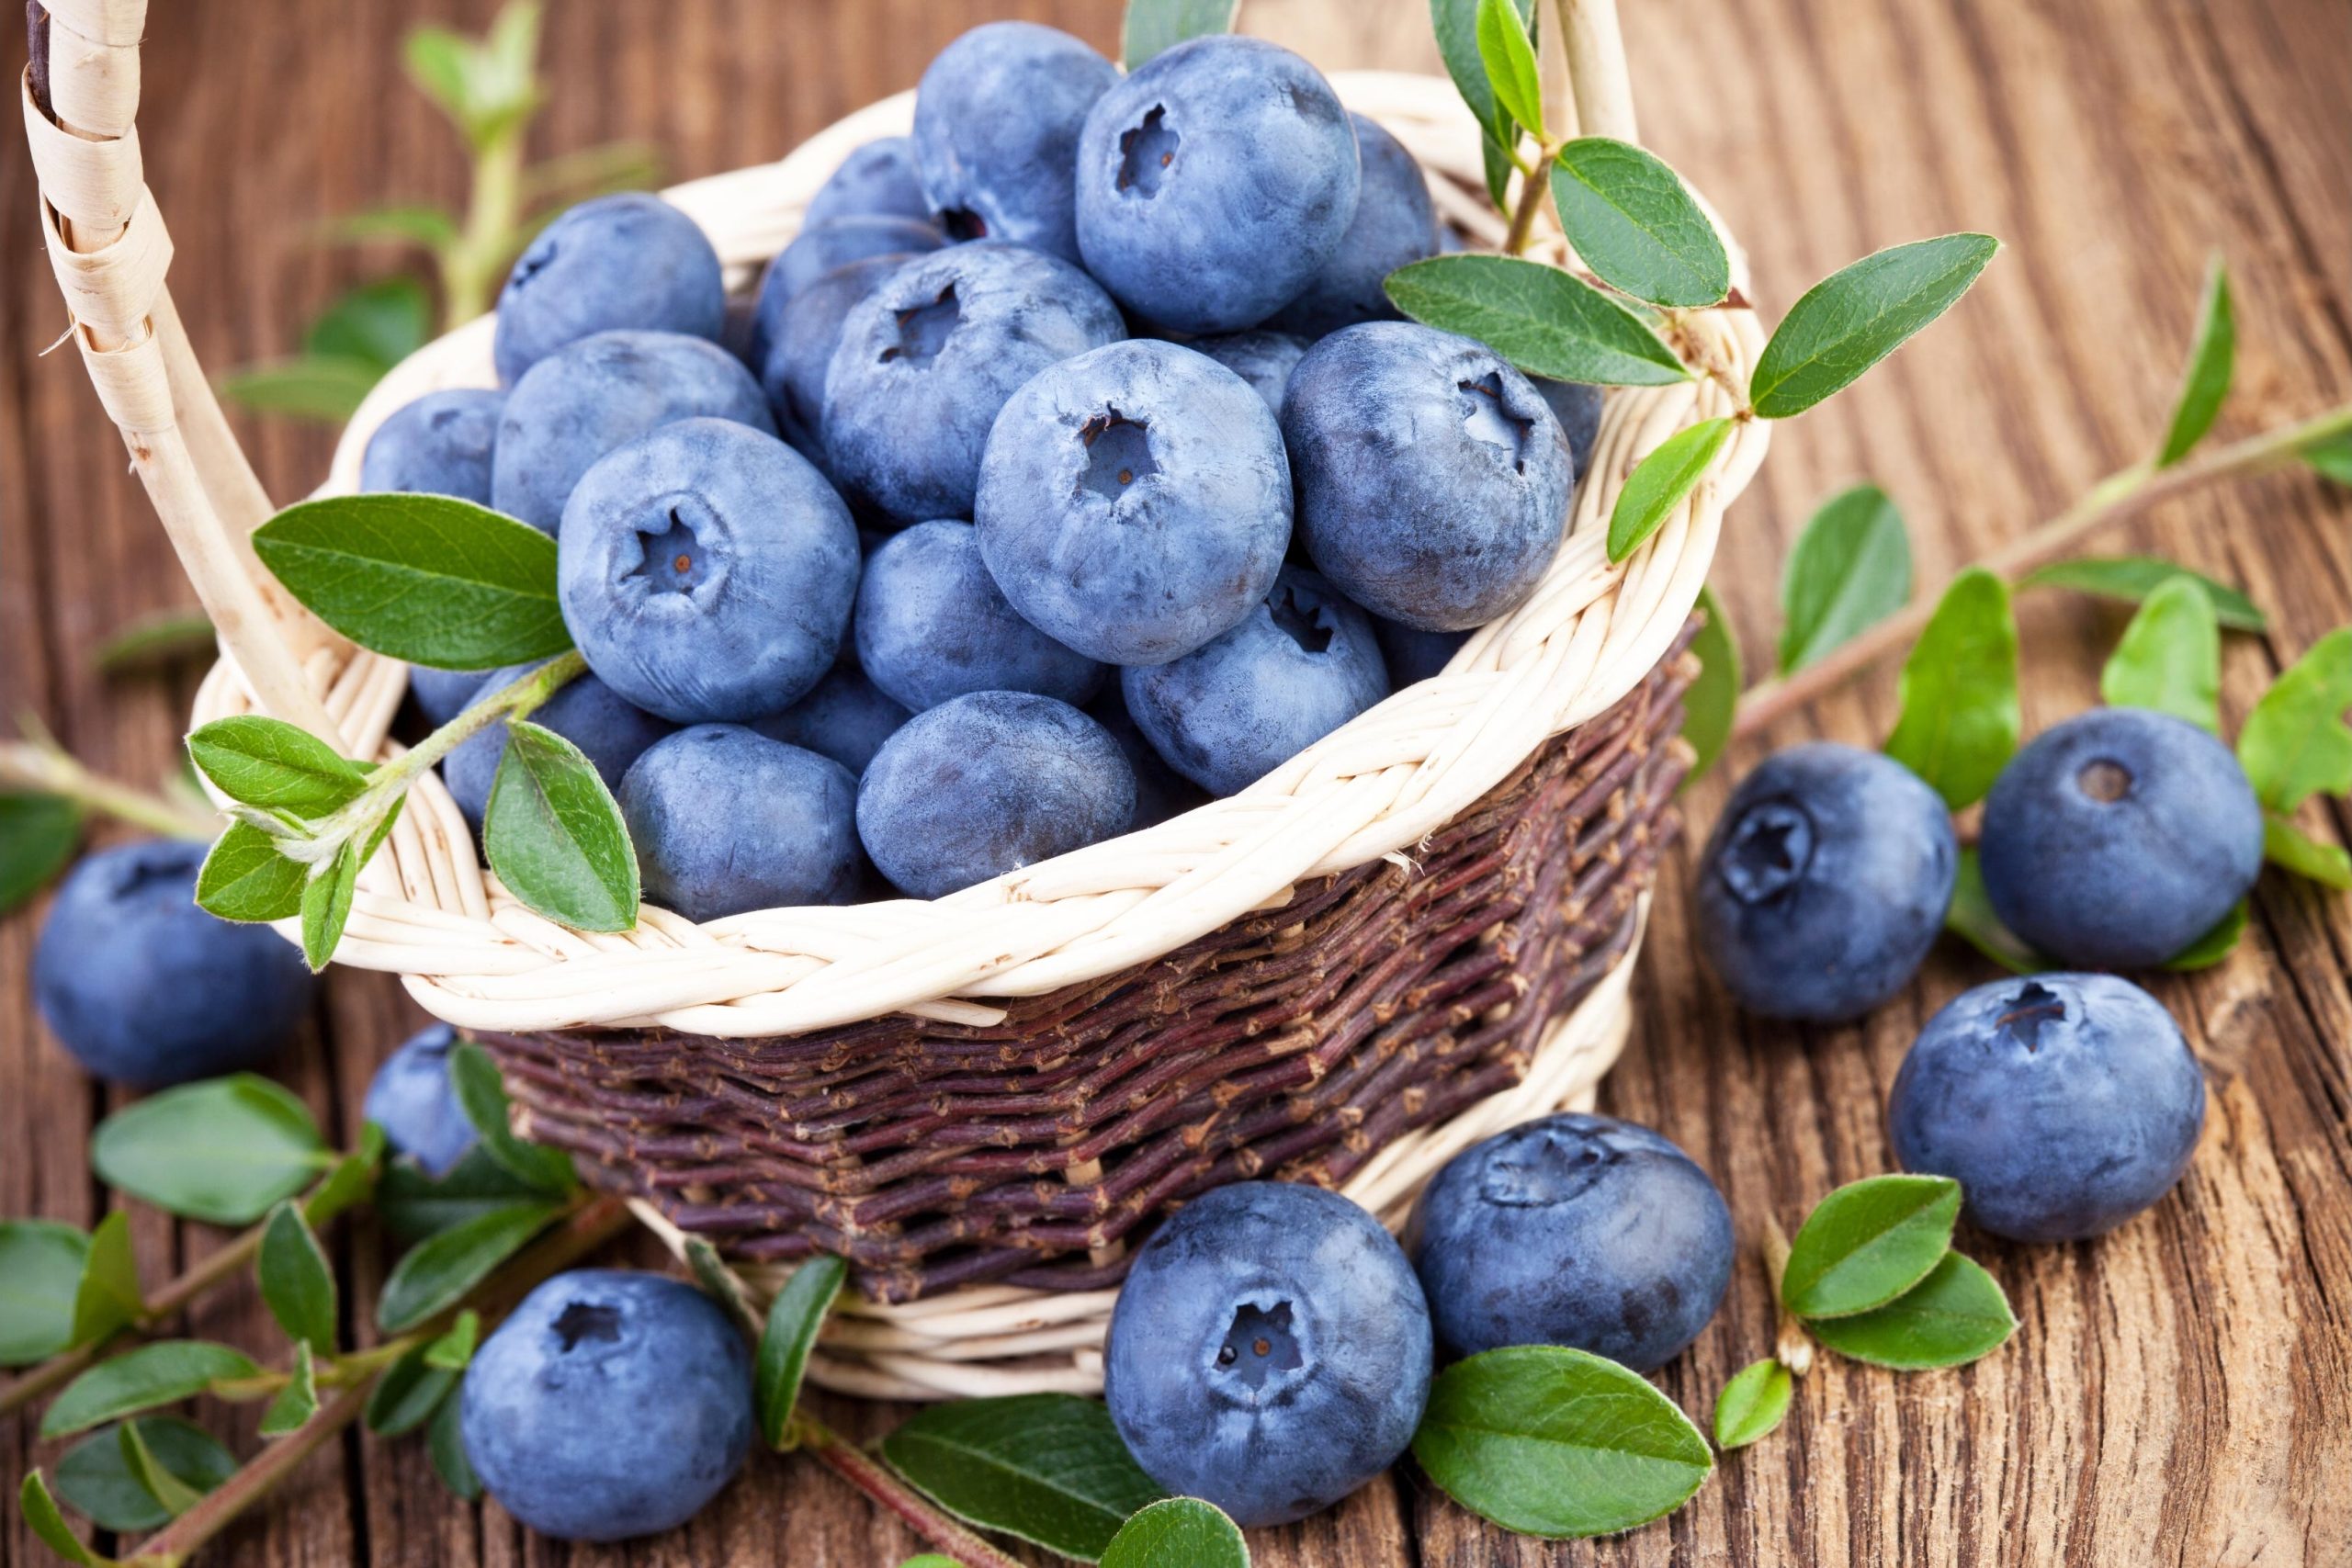 Eating Blueberries Regularly May Reduce Risk of Dementia